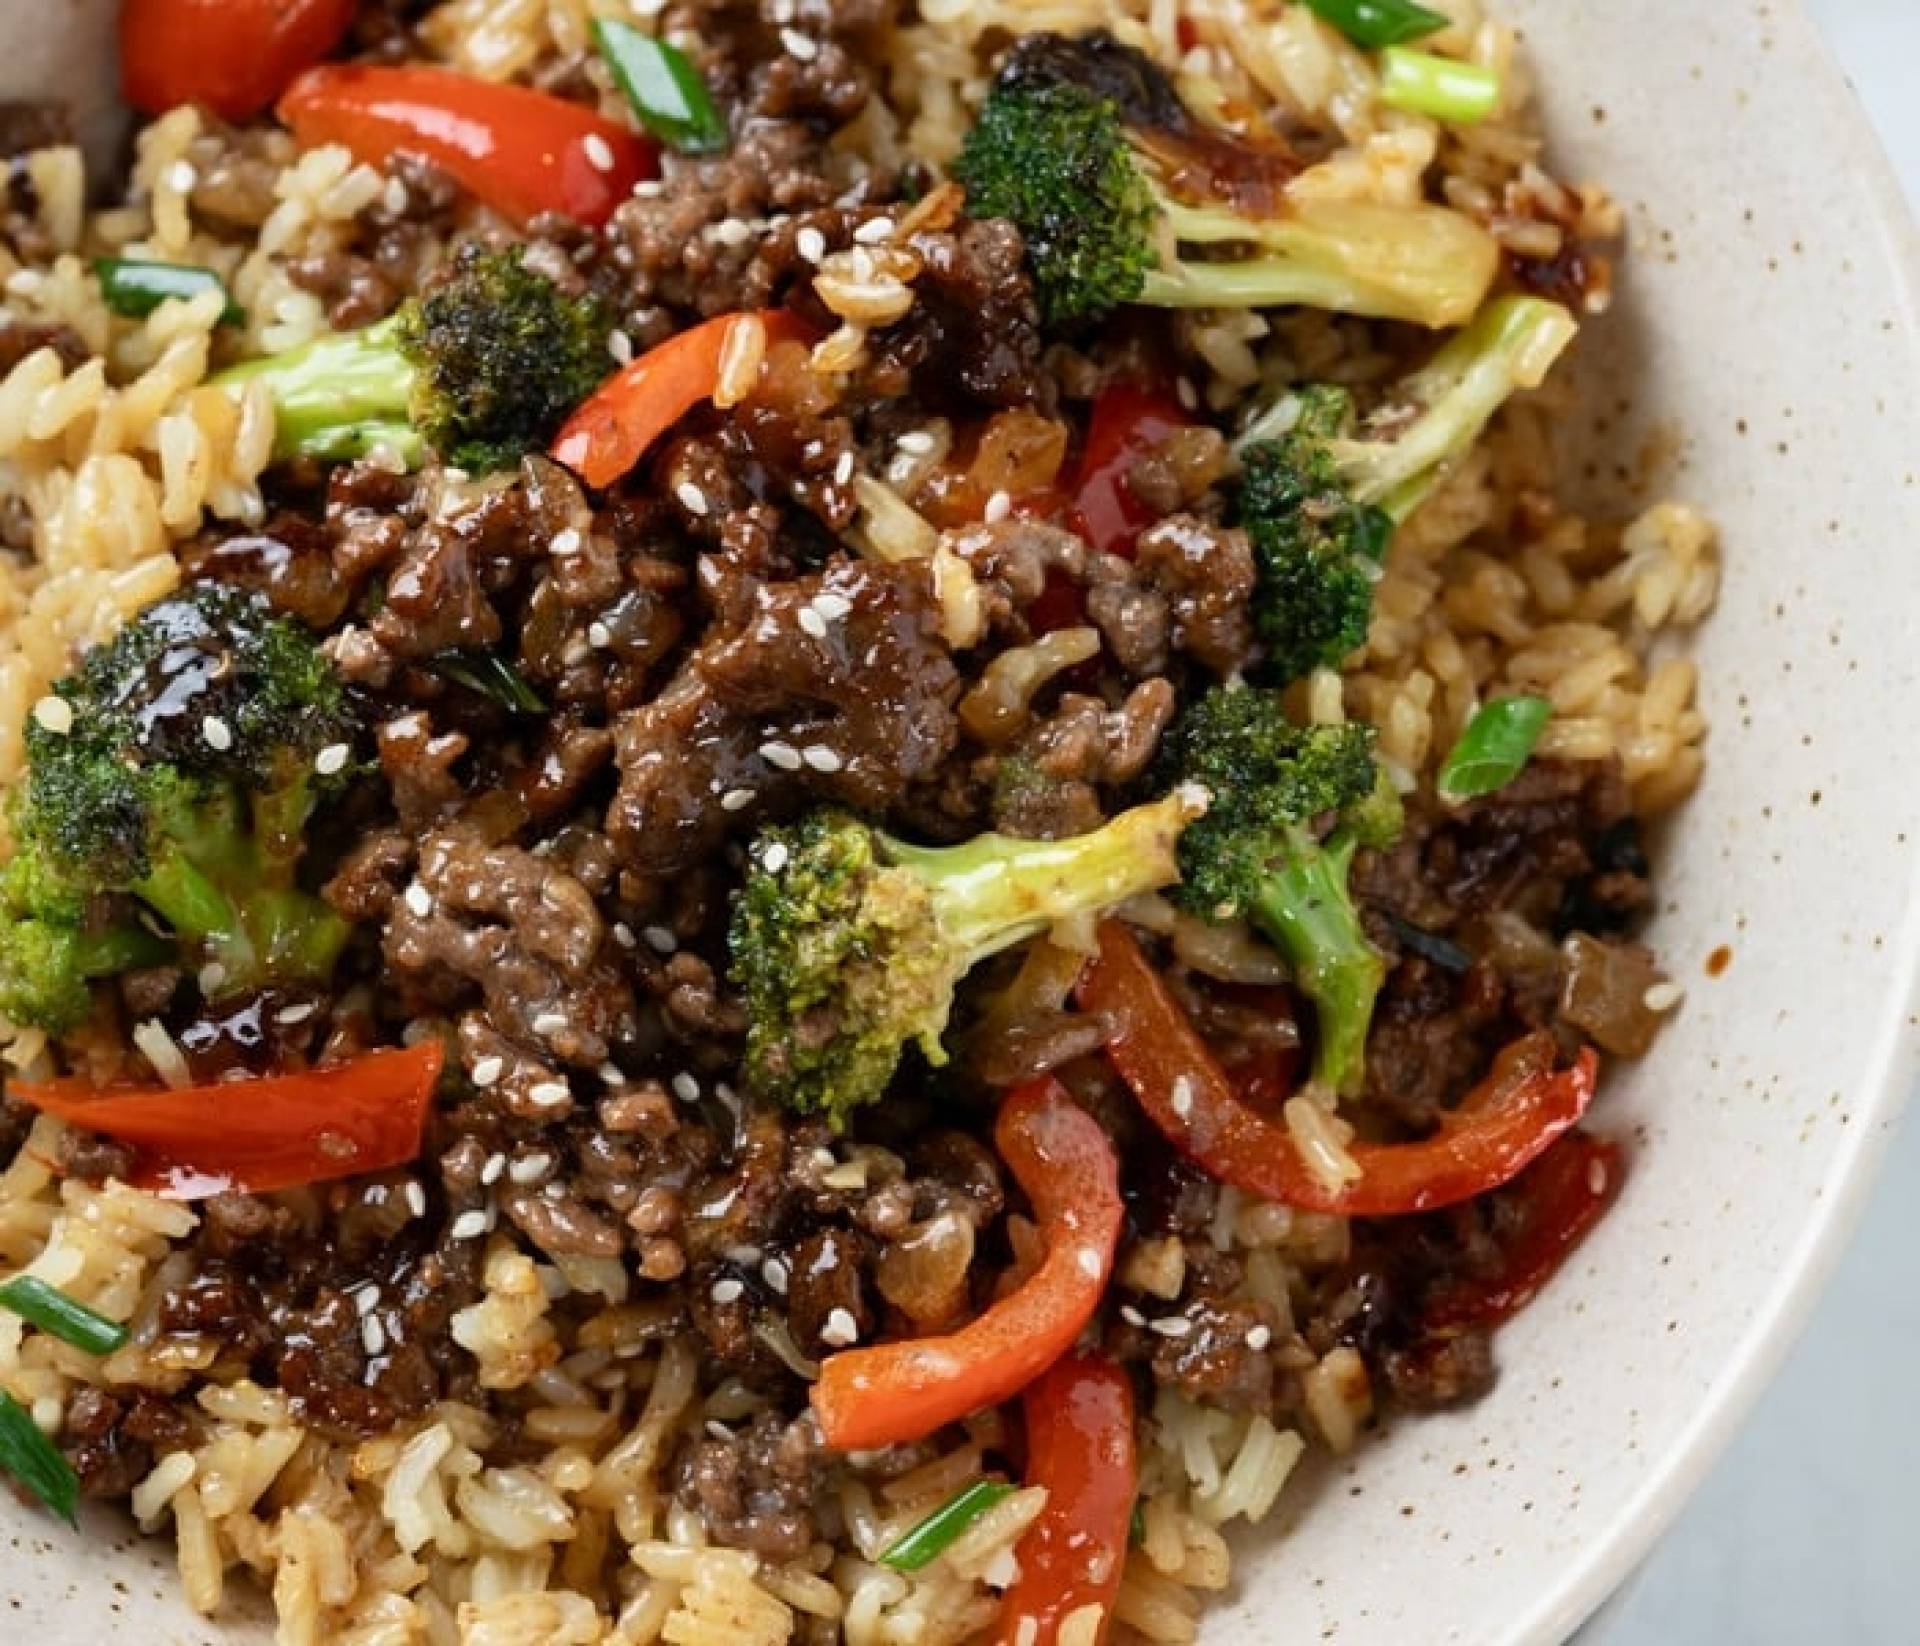 Spiced Lean Ground Beef Stir-Fry with Brown Rice